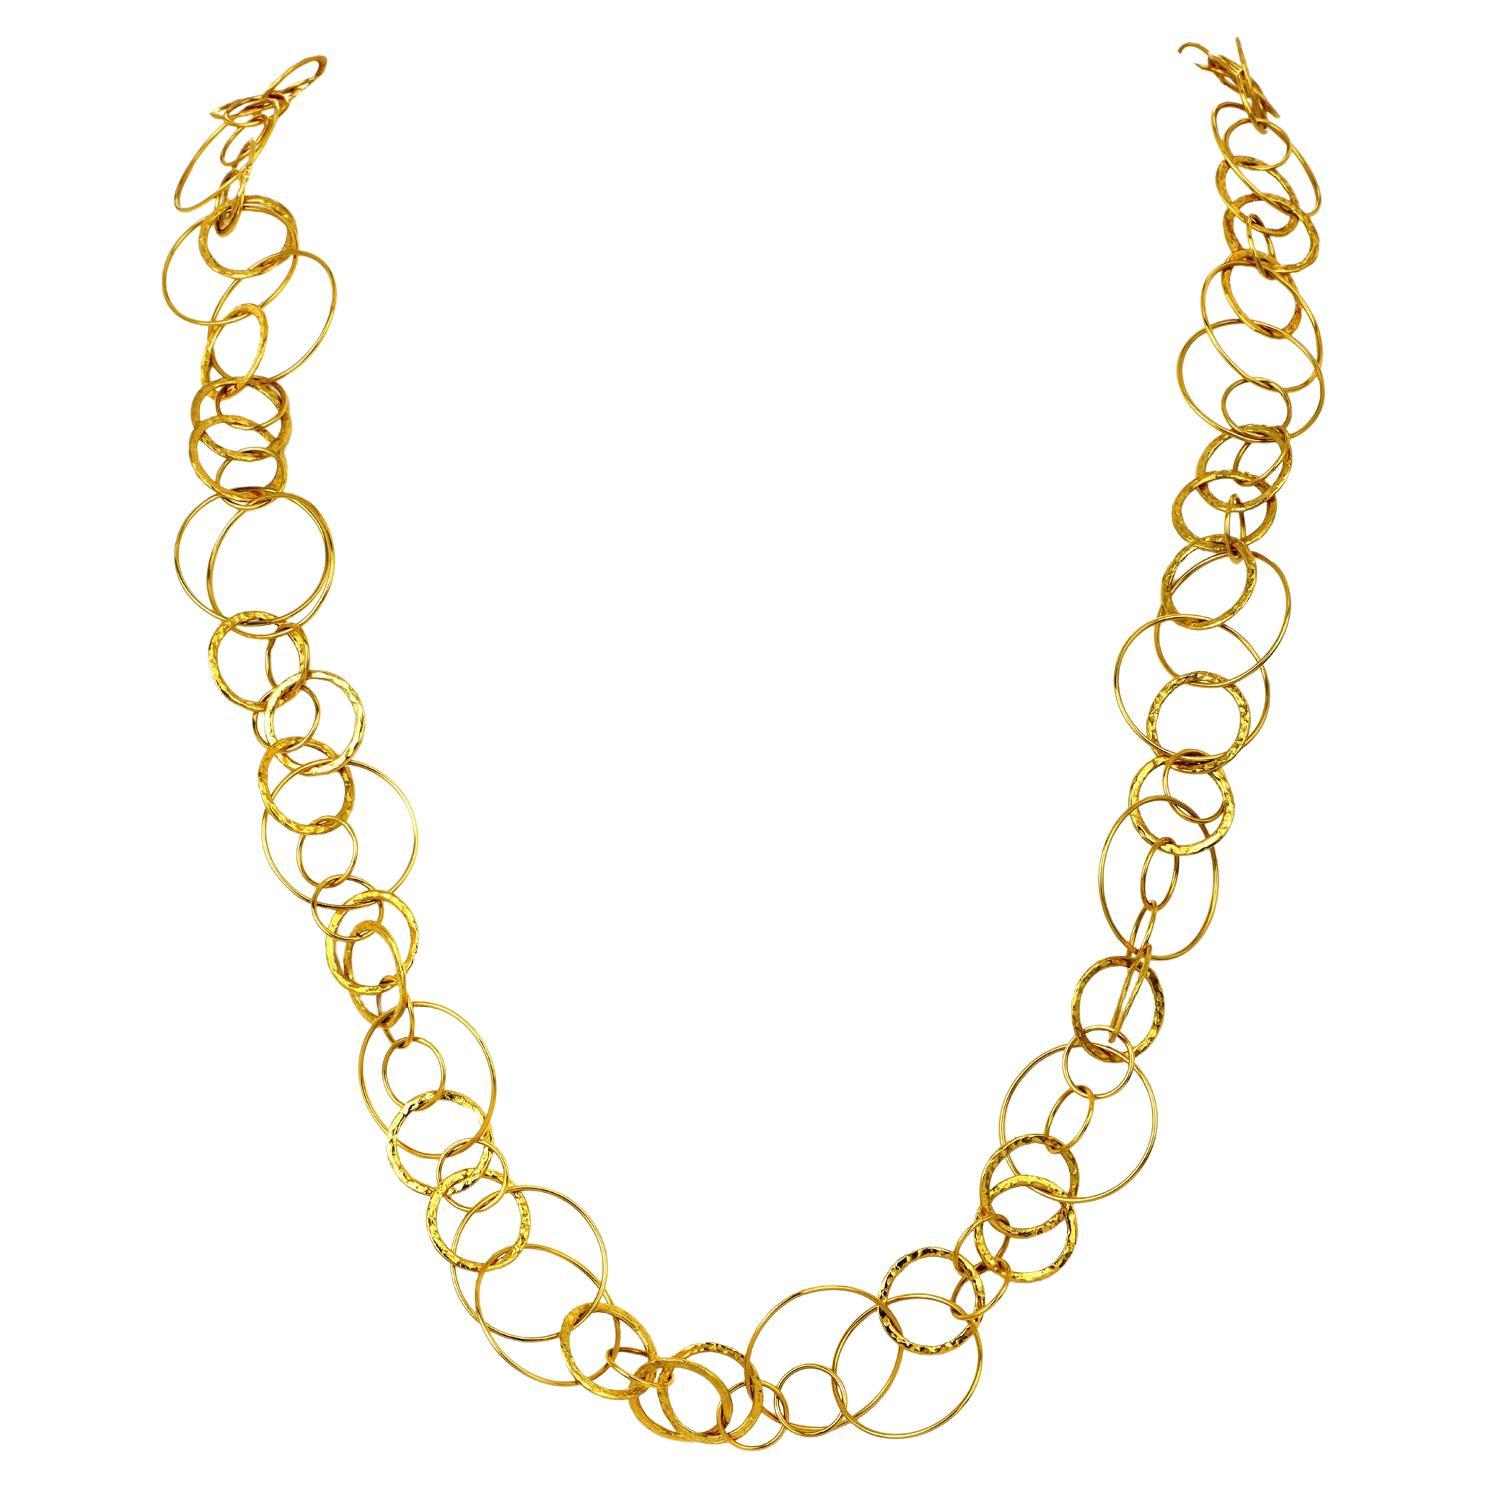 Spitzer & Furman 18k Yellow Gold Multi Hoop Round Link Chain Necklace